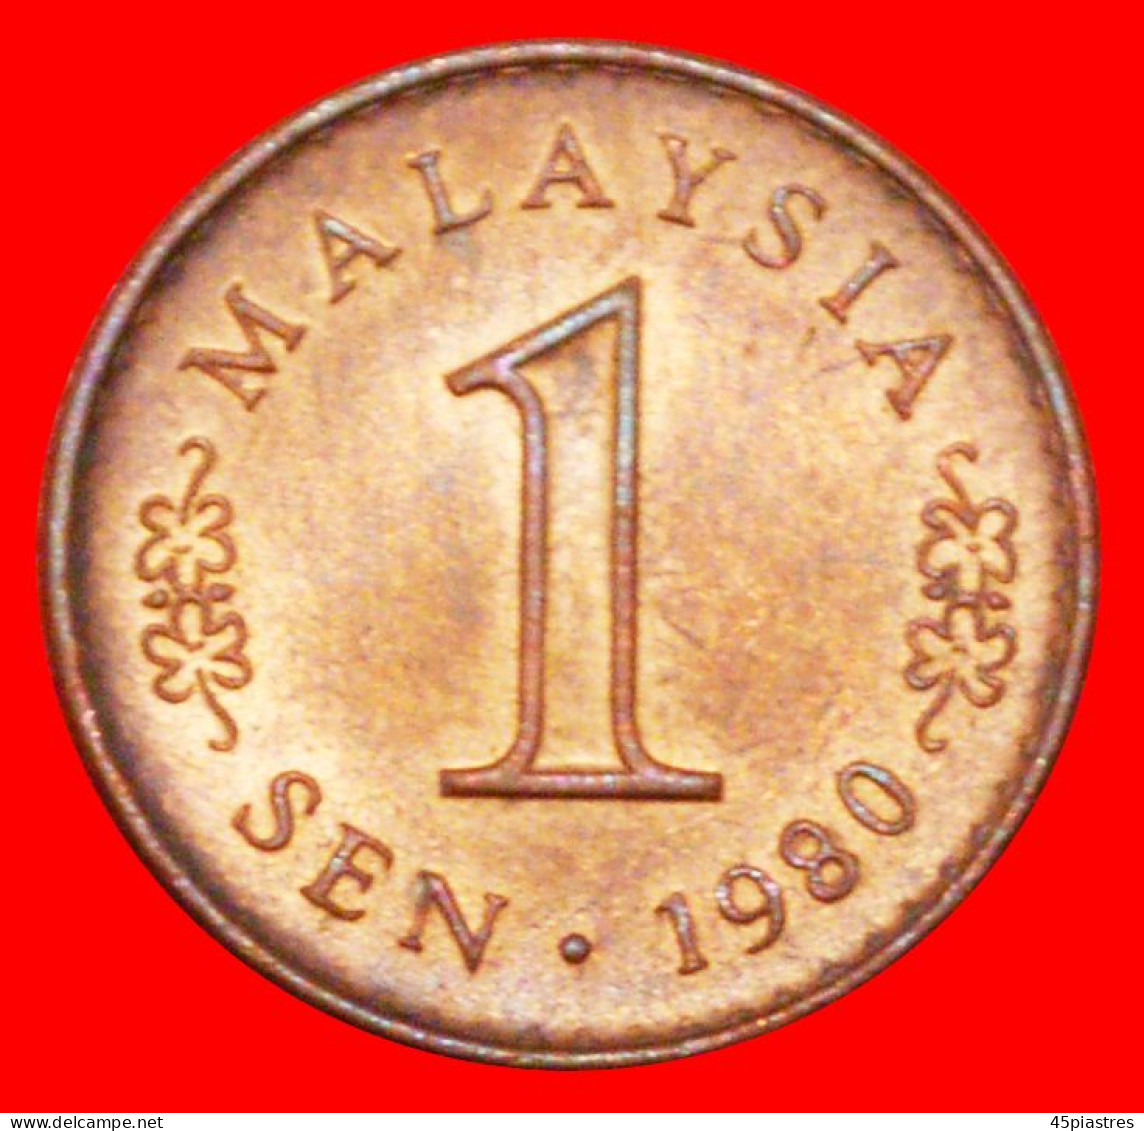 * MOON AND STAR ERROR  NOT BRONZE (1967-1988): MALAYSIA  1 SEN 1980 UNC MINT LUSTRE! · LOW START ·  NO RESERVE! - Malaysie